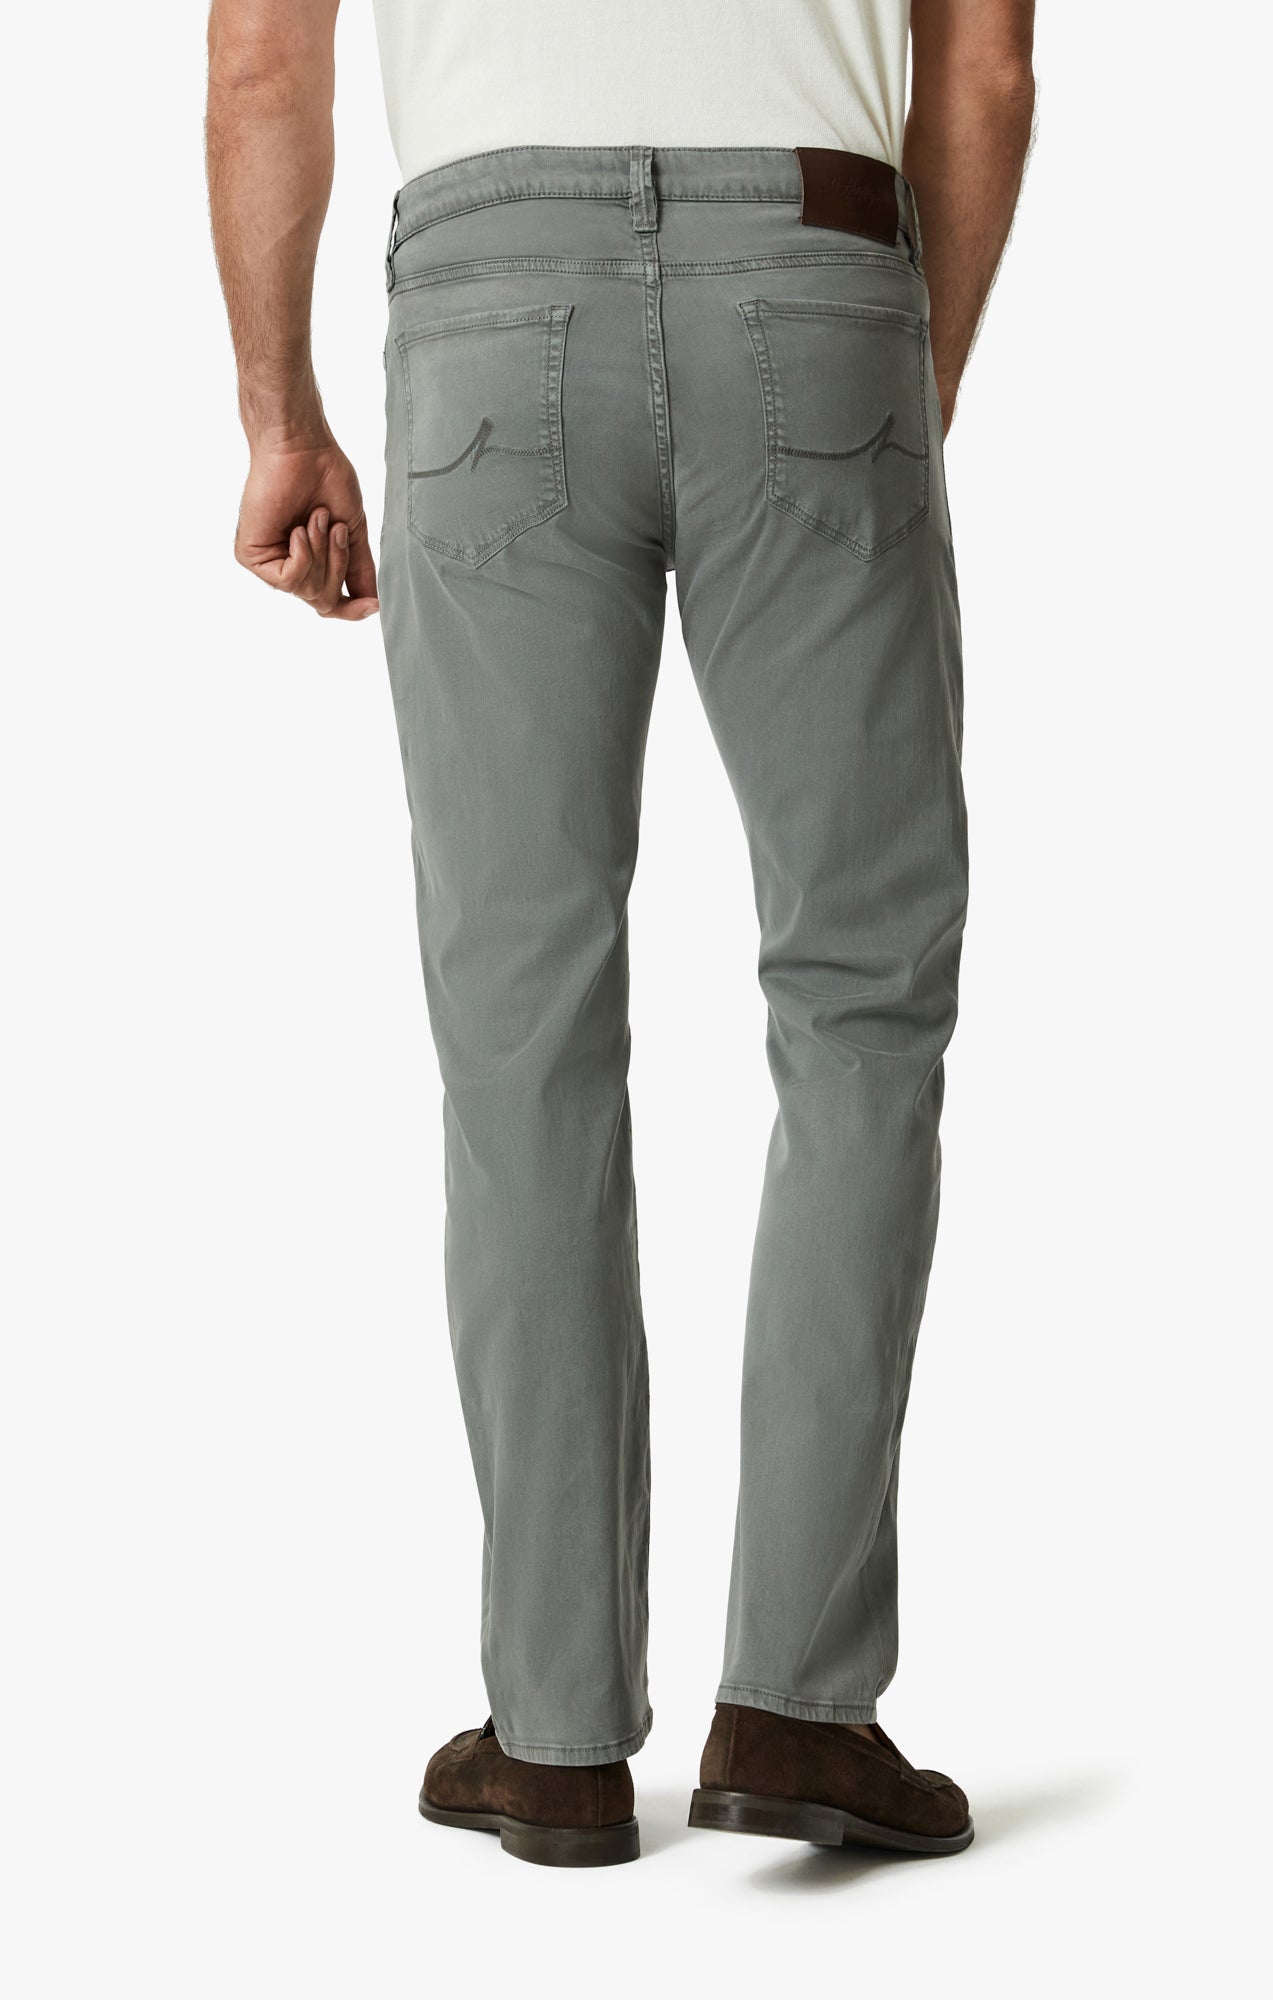 Charisma Relaxed Straight Leg Pants In Sedona Sage Twill